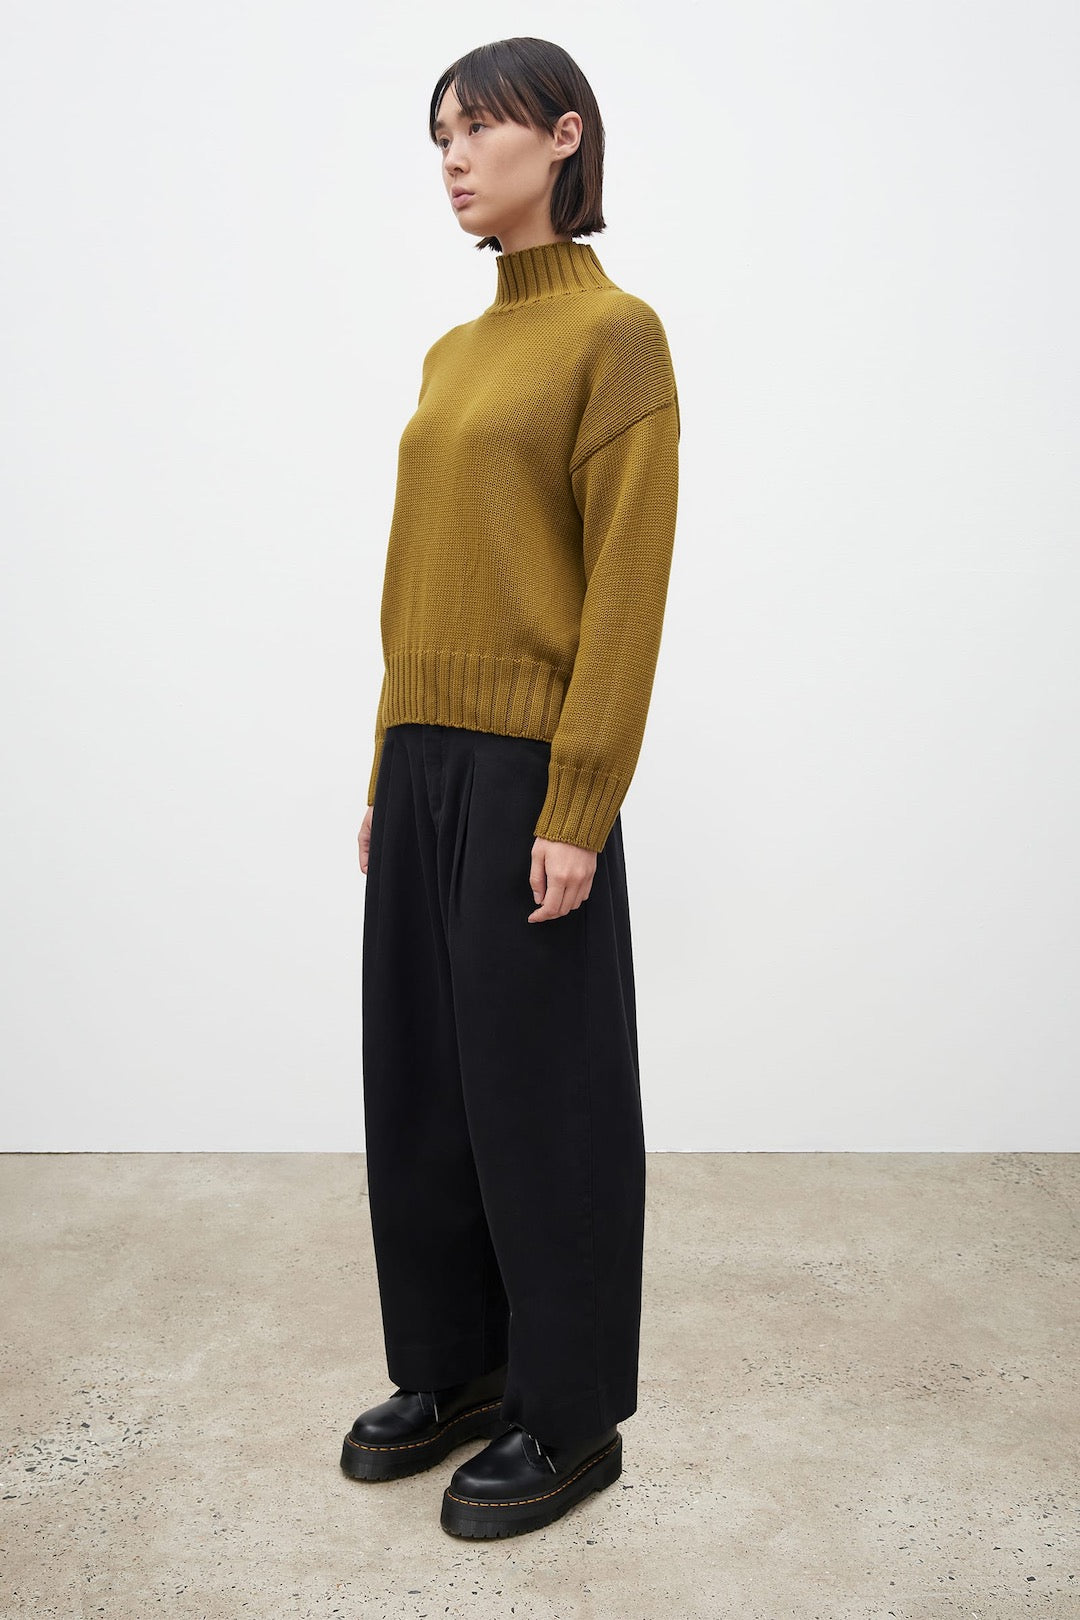 The model is wearing a Kowtow Staple Sweater – Chartreuse and black wide leg pants.